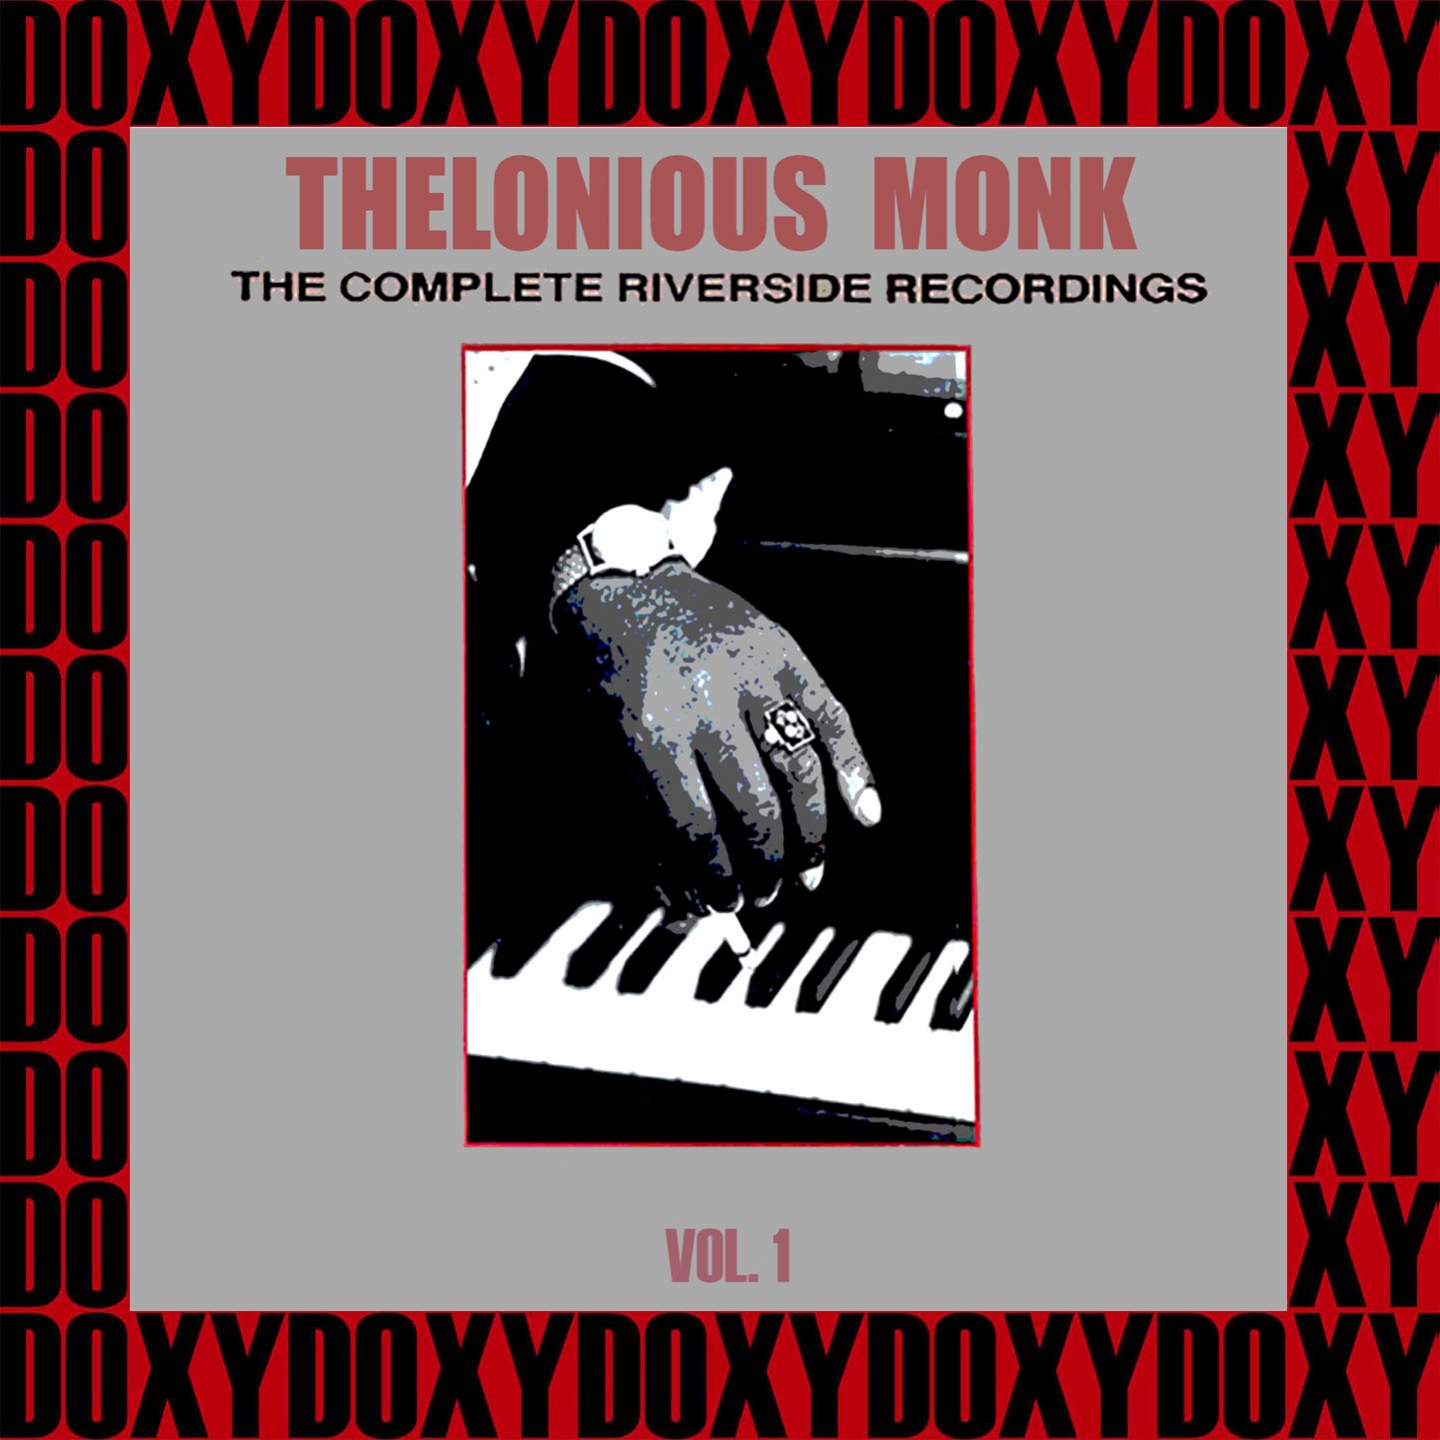 The Complete Riverside Recordings, Vol. 1 (Hd Remastered Edition, Doxy Collection)